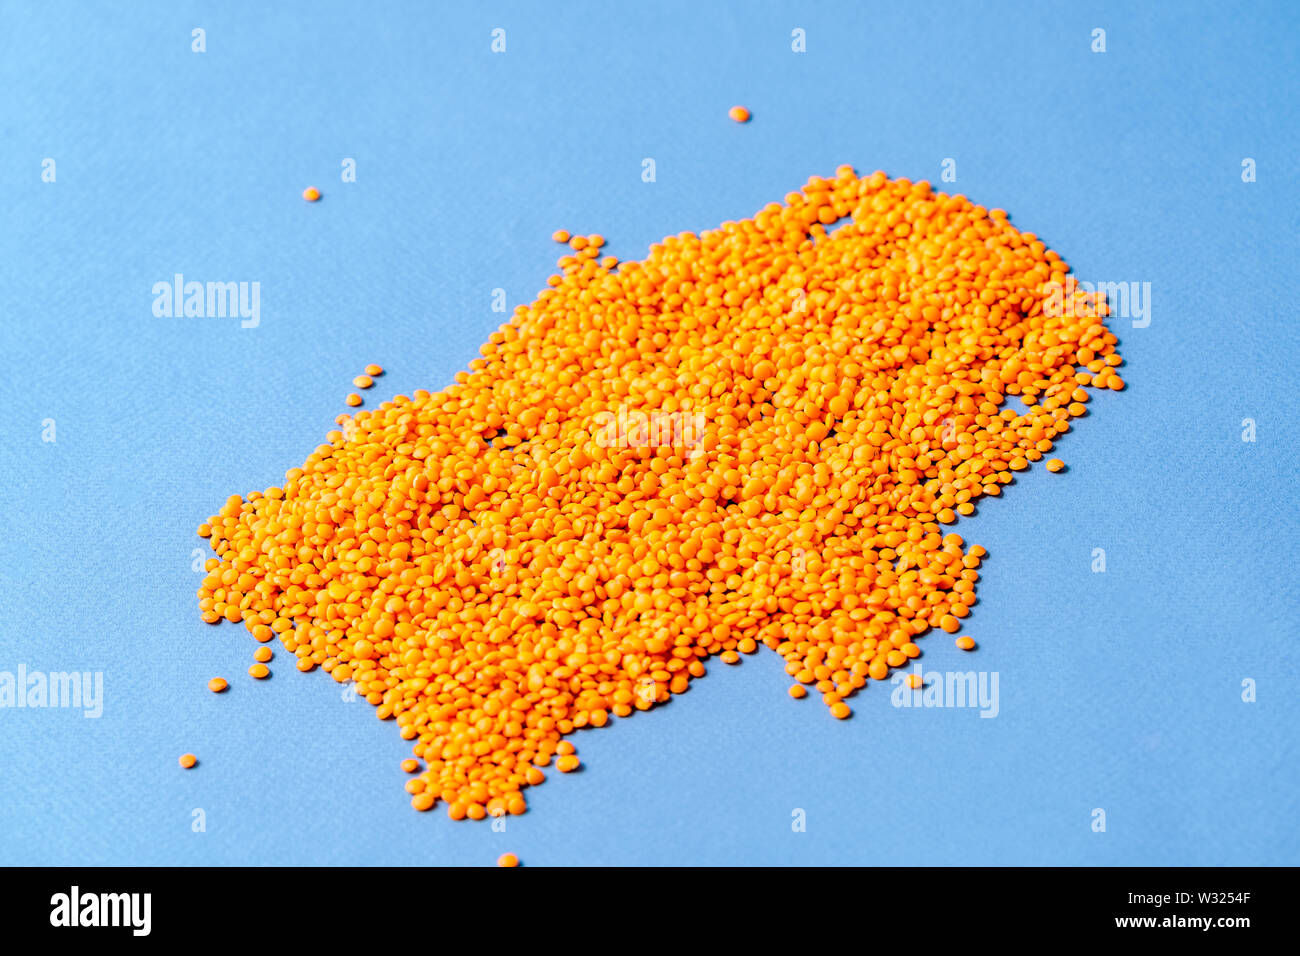 Pattern with Small orange lentils seeds of annual legume plant, over blue background. Stock Photo